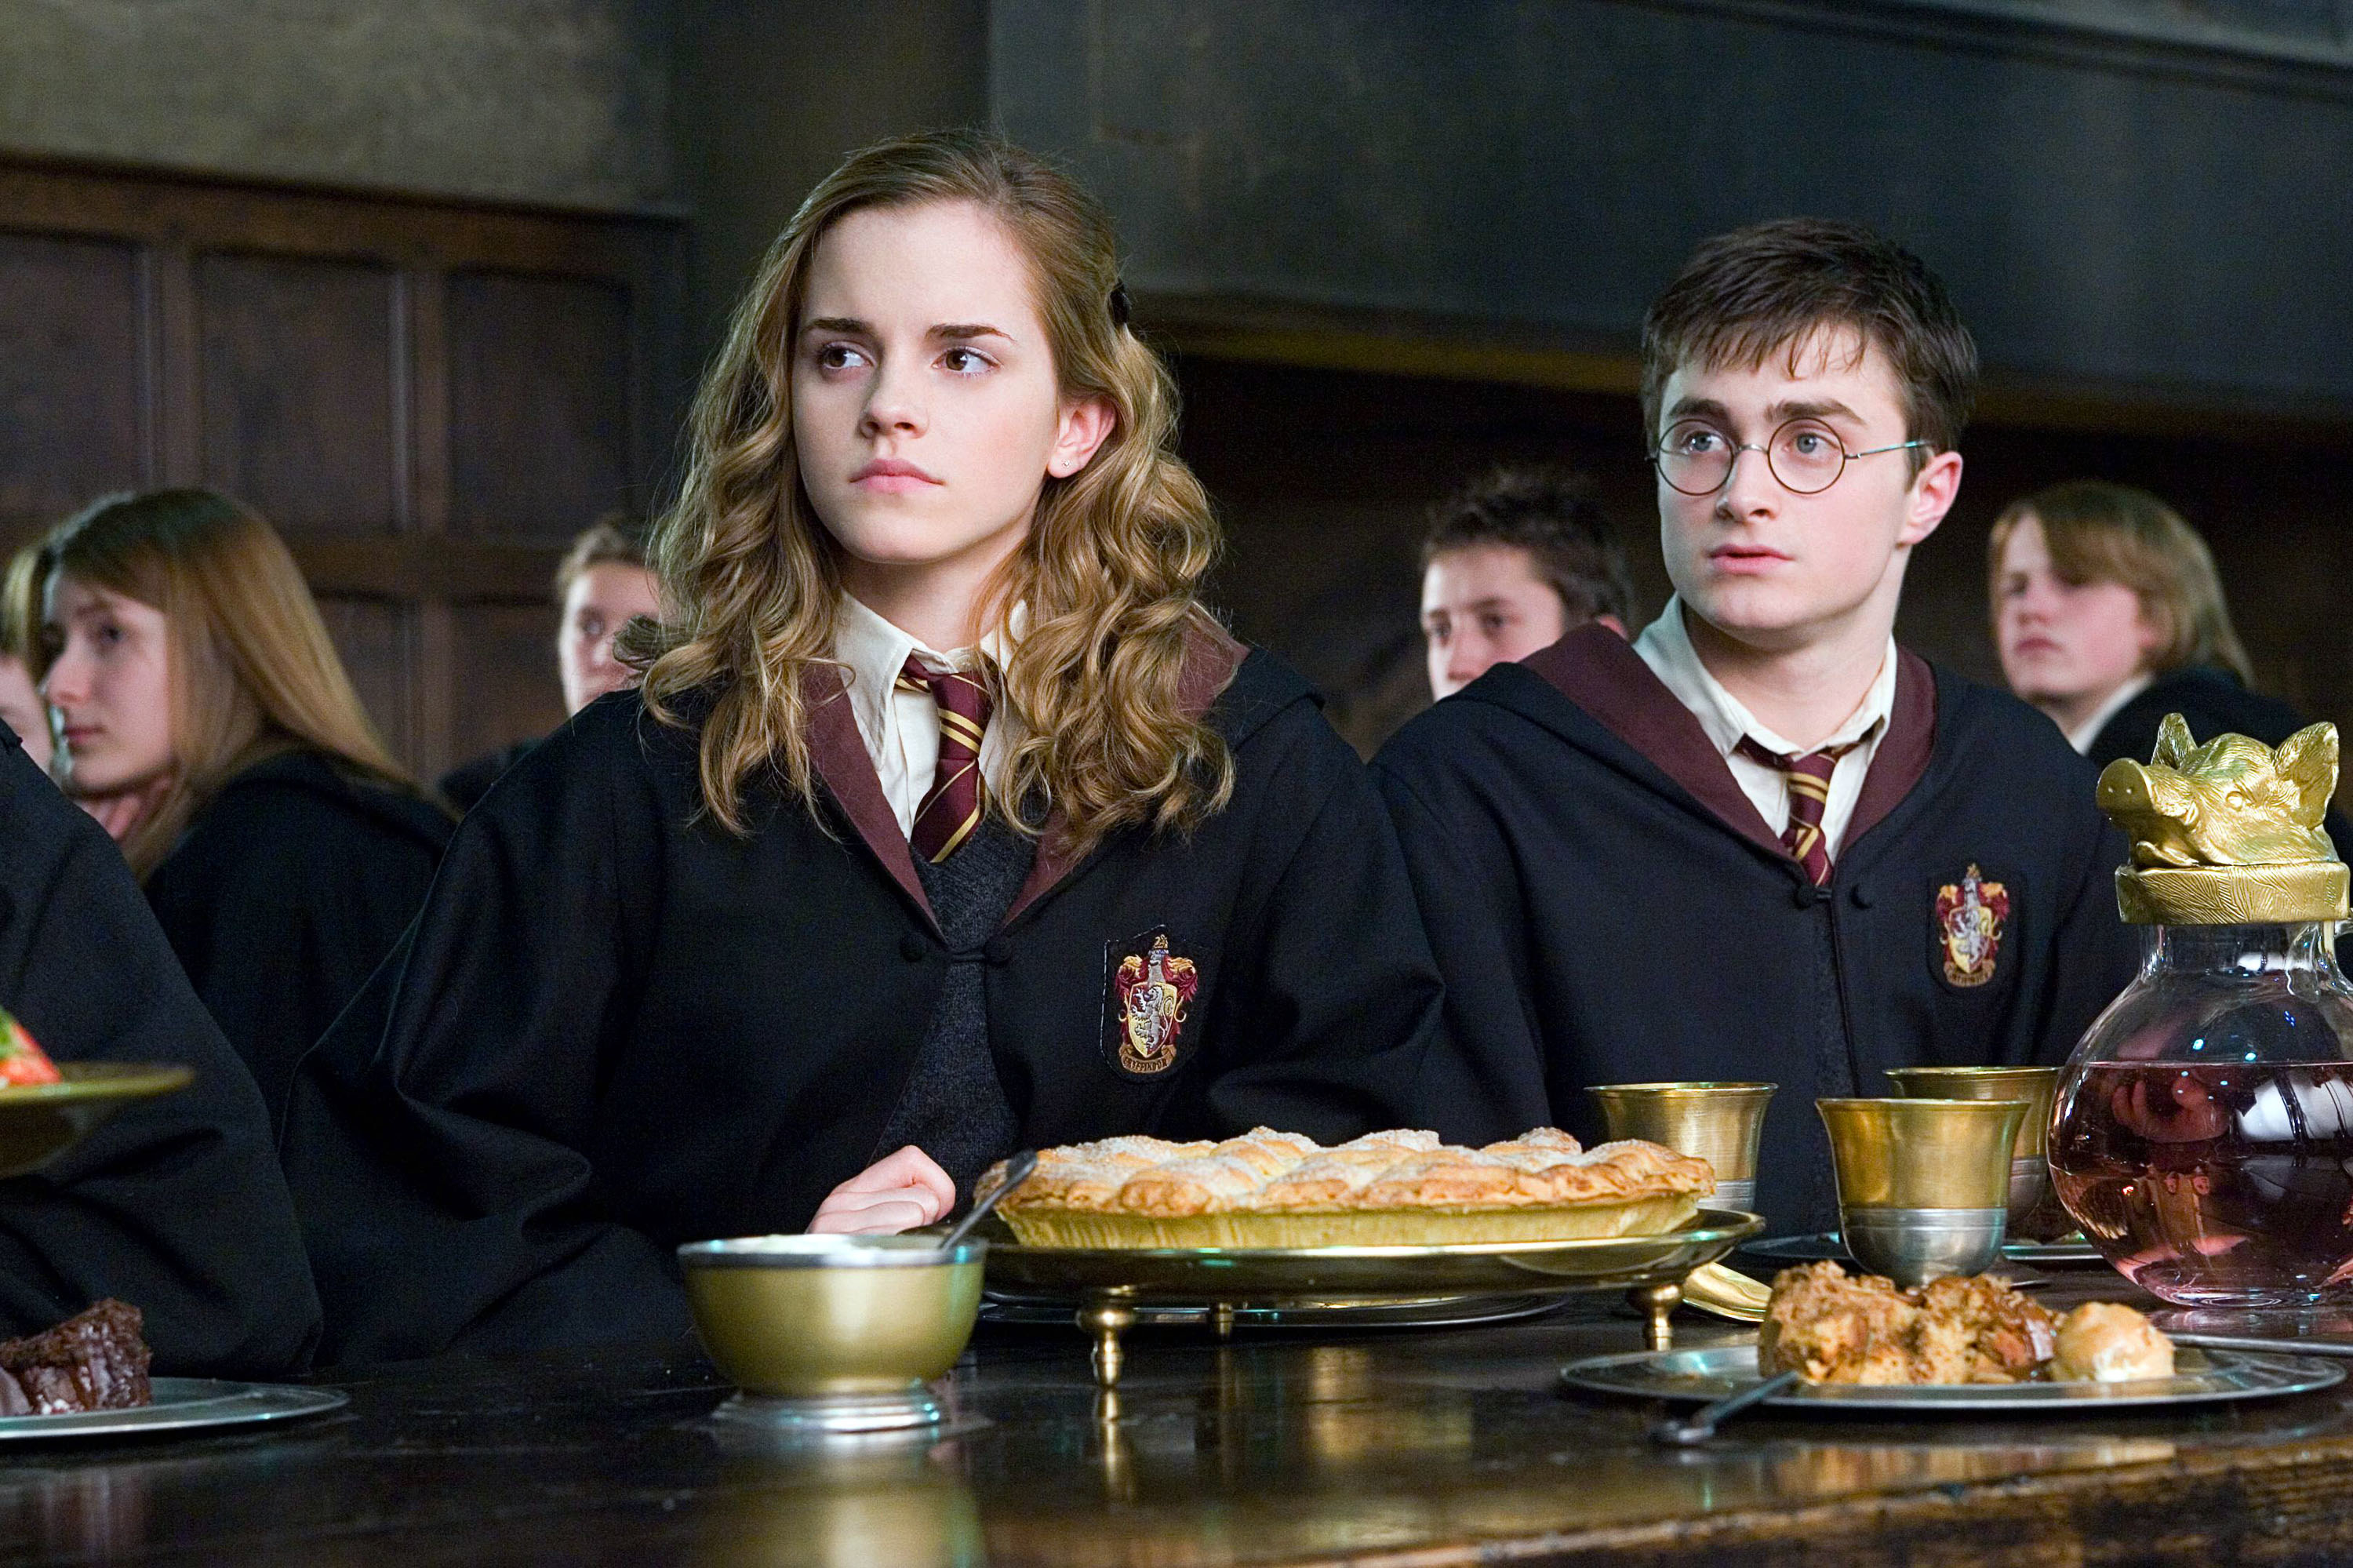 Hermione and Harry at dinner in the Great Hall